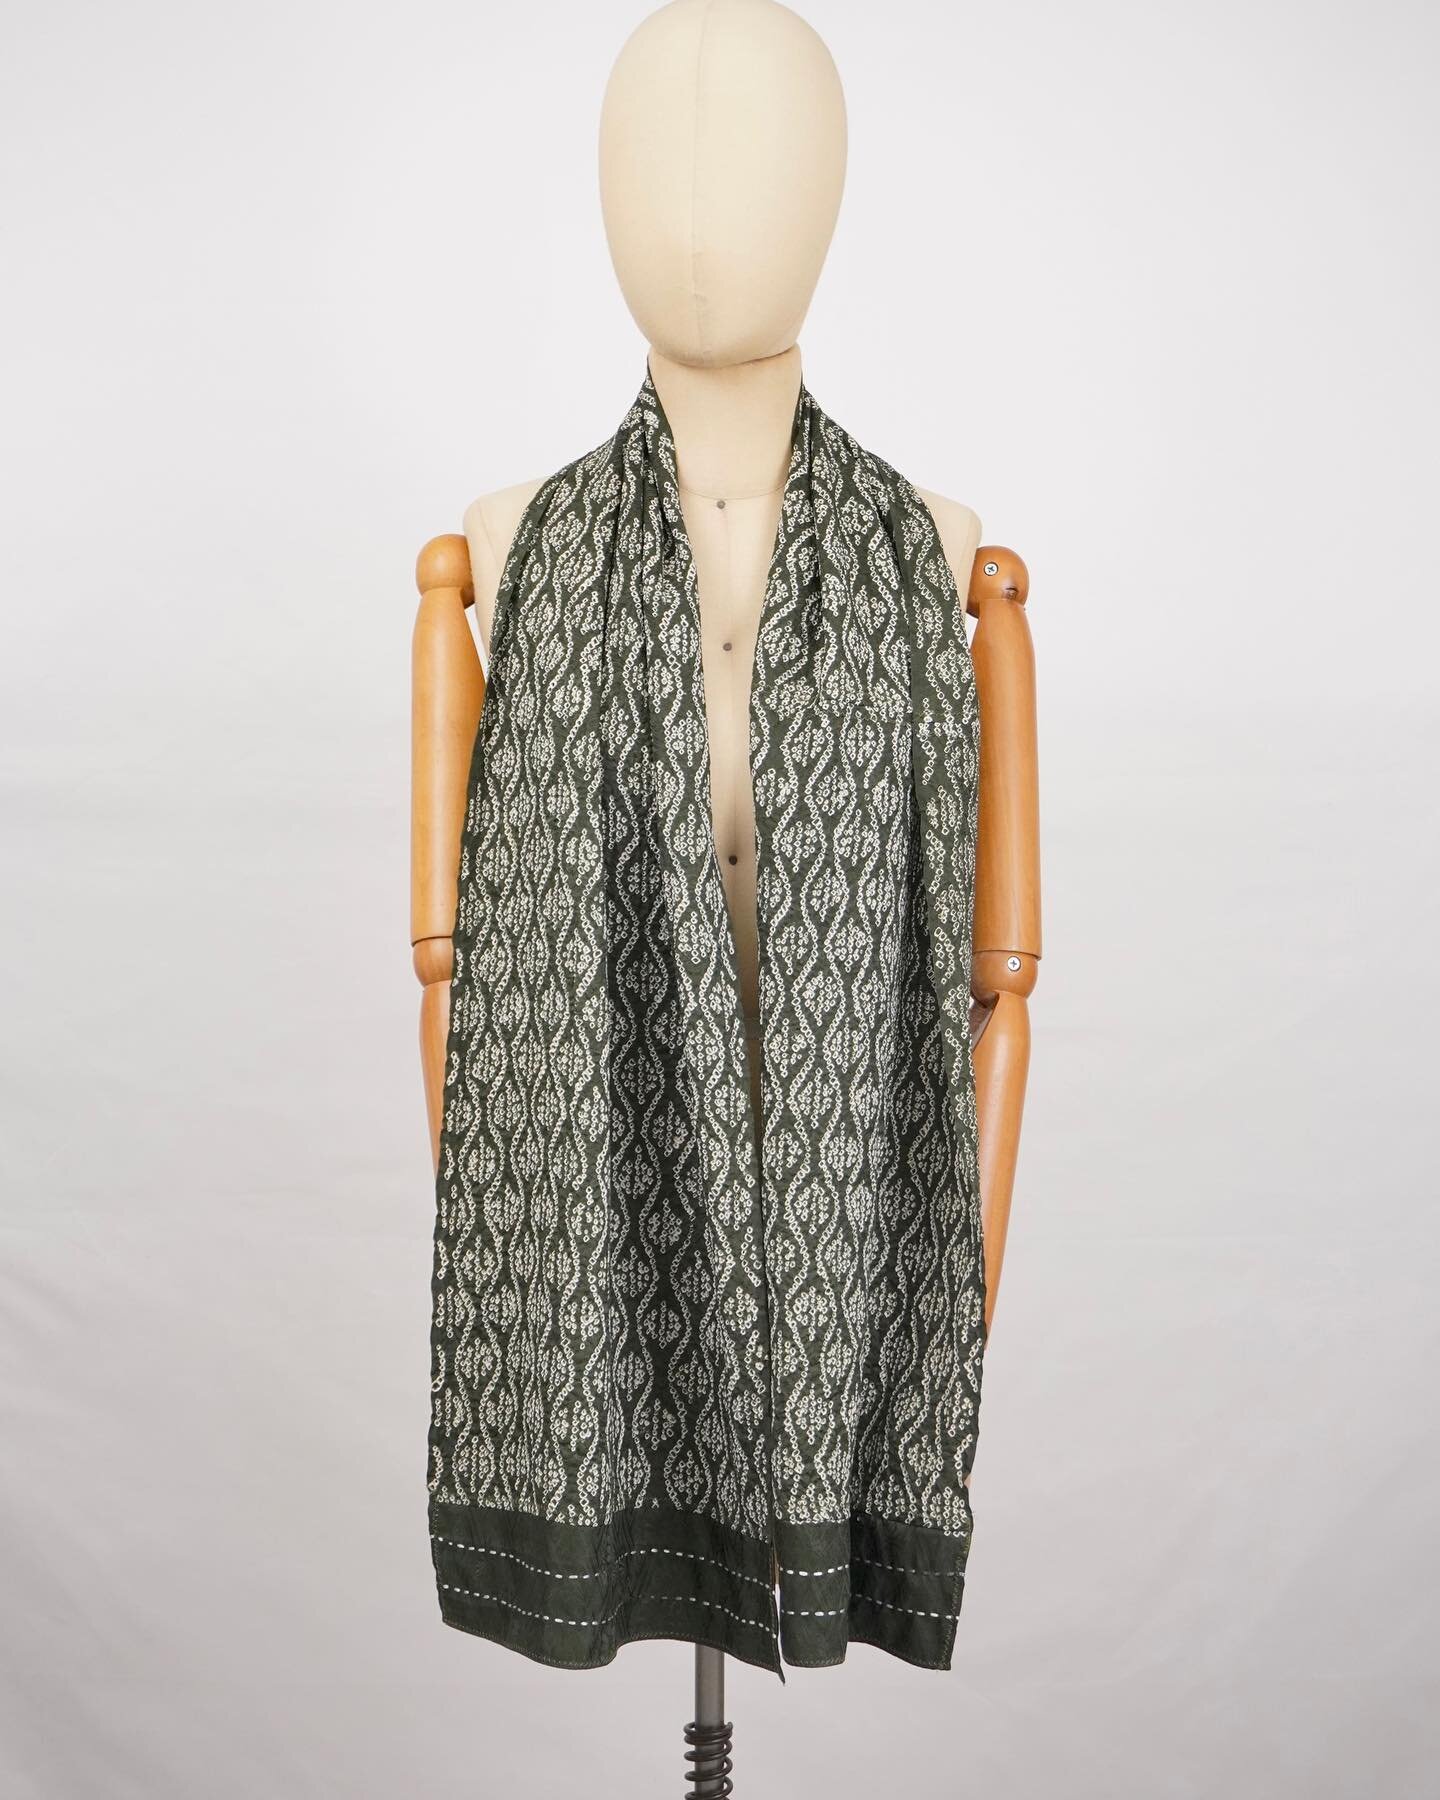 Winter is almost here!!!!

When trying to stay warm and stylish in the winter, our Shibori scarves are the way to go!

Come visit my website to see dozens of Shibori scarves!
Link in bio

#scarf #japanesesilk #kimonofabric #vintagejapanesesilks #japa